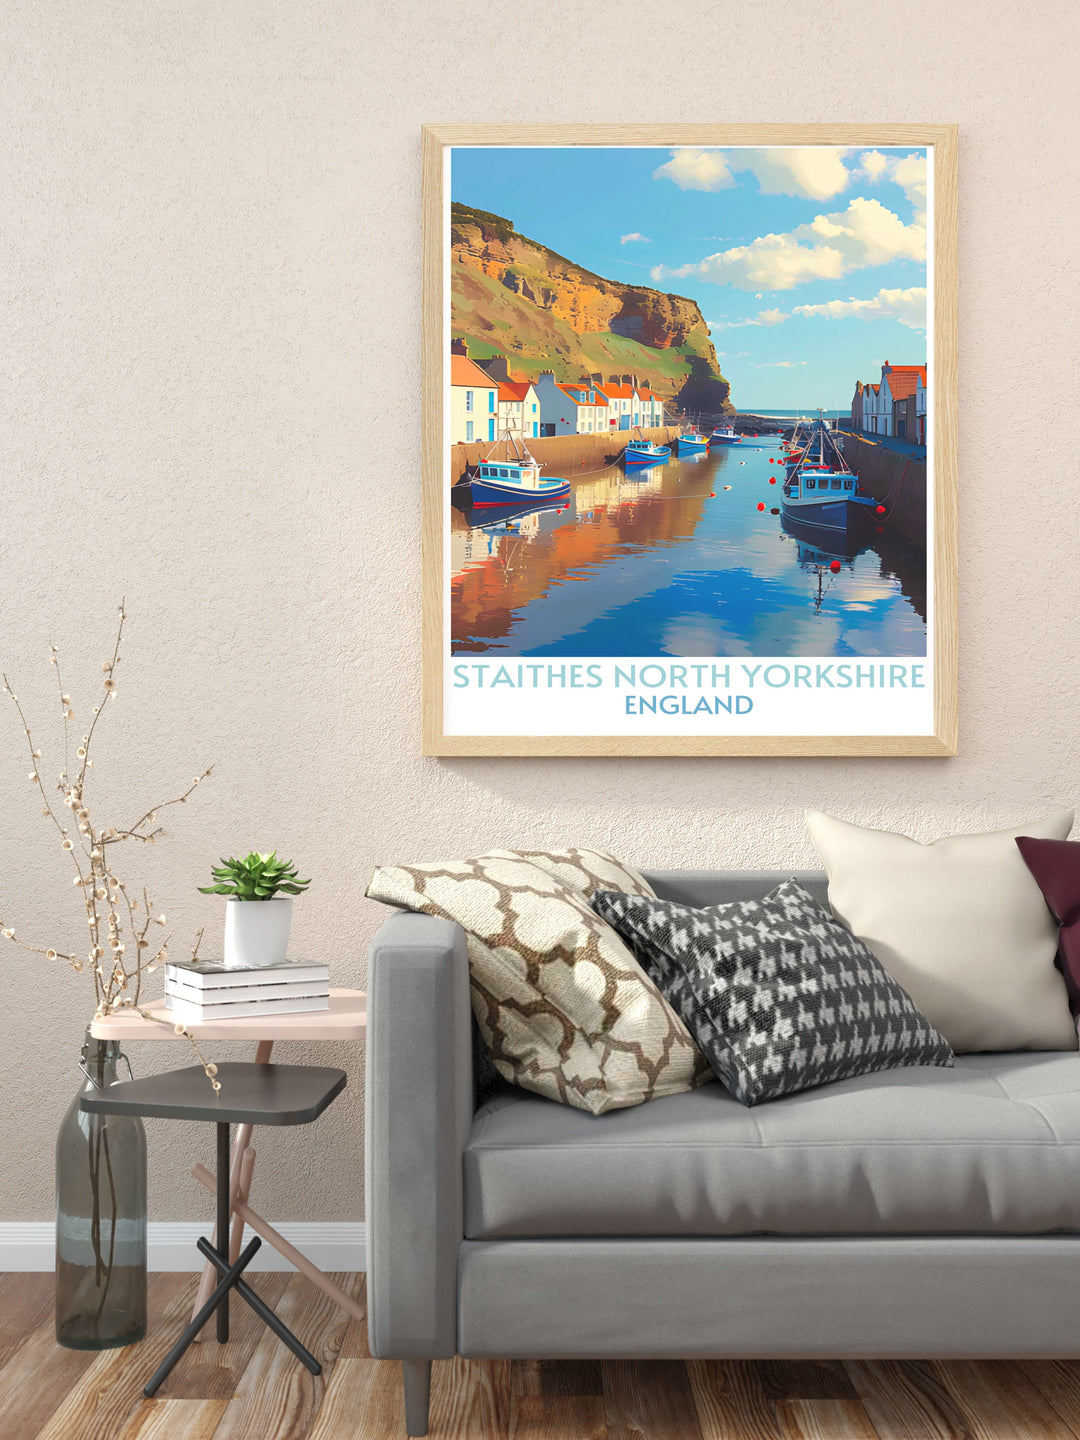 Framed art print of Staithes, North Yorkshire, capturing the picturesque harbor and charming cottages. Perfect for adding a touch of coastal beauty to your home.